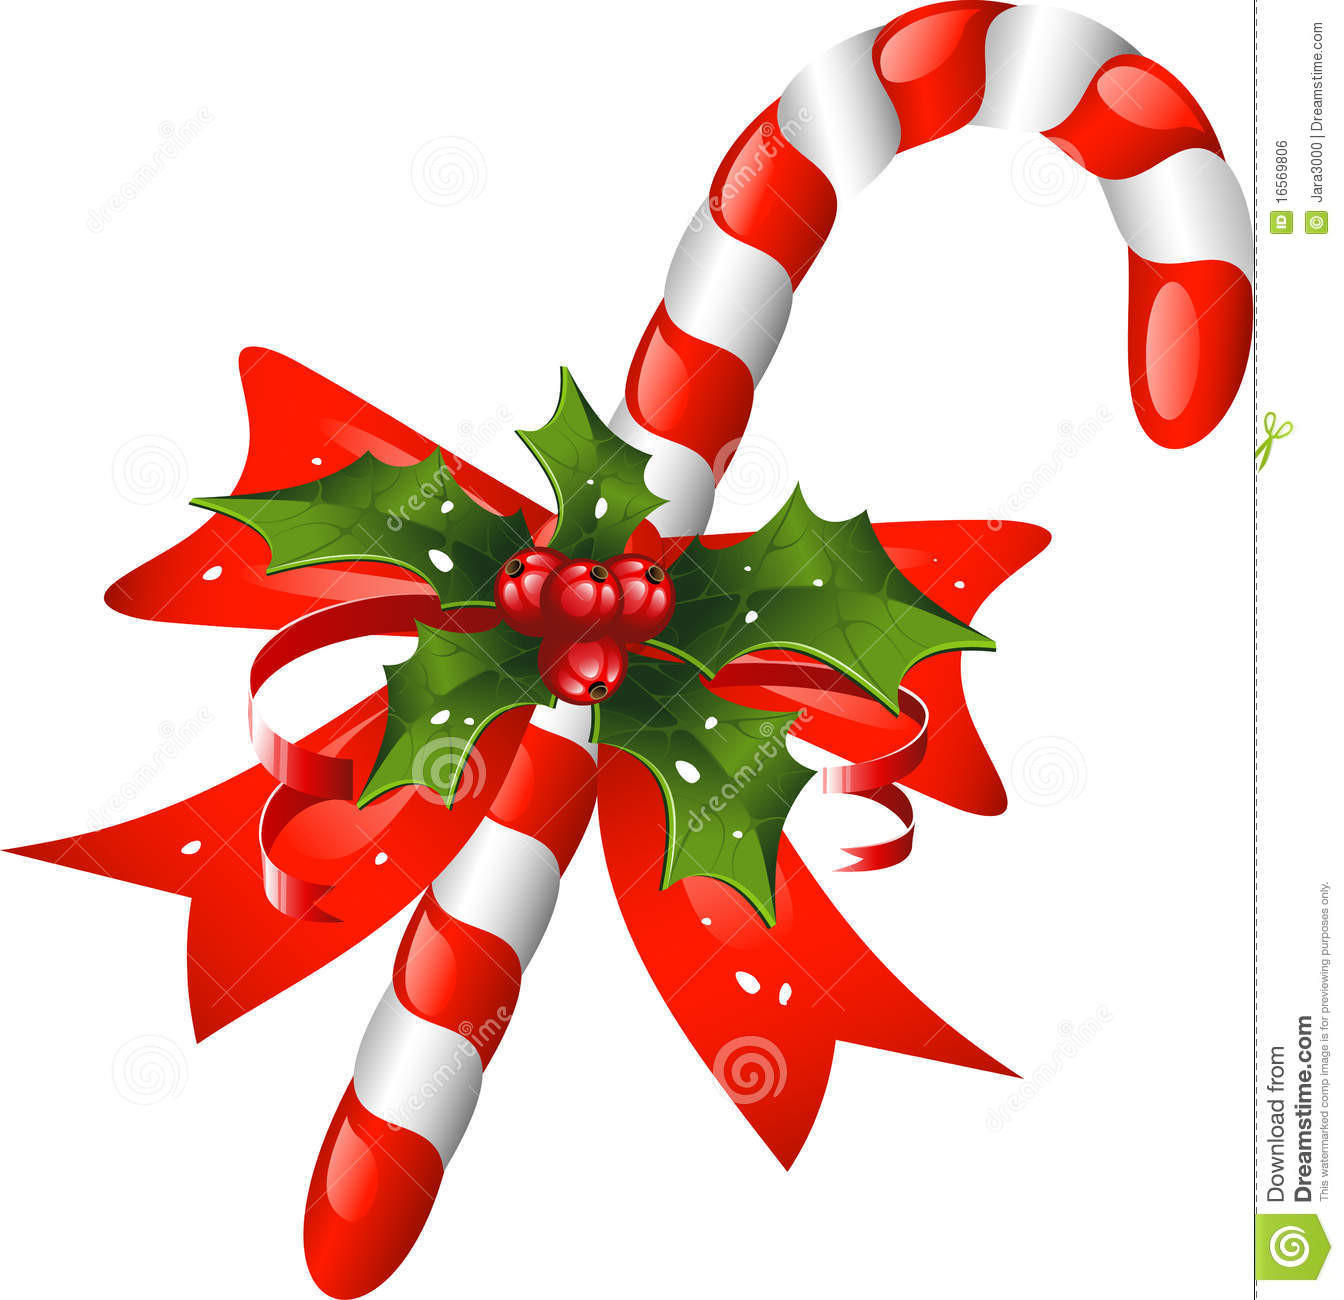 Candy For Christmas
 Christmas Candy Cane Decorated With A Bow And Holl Stock